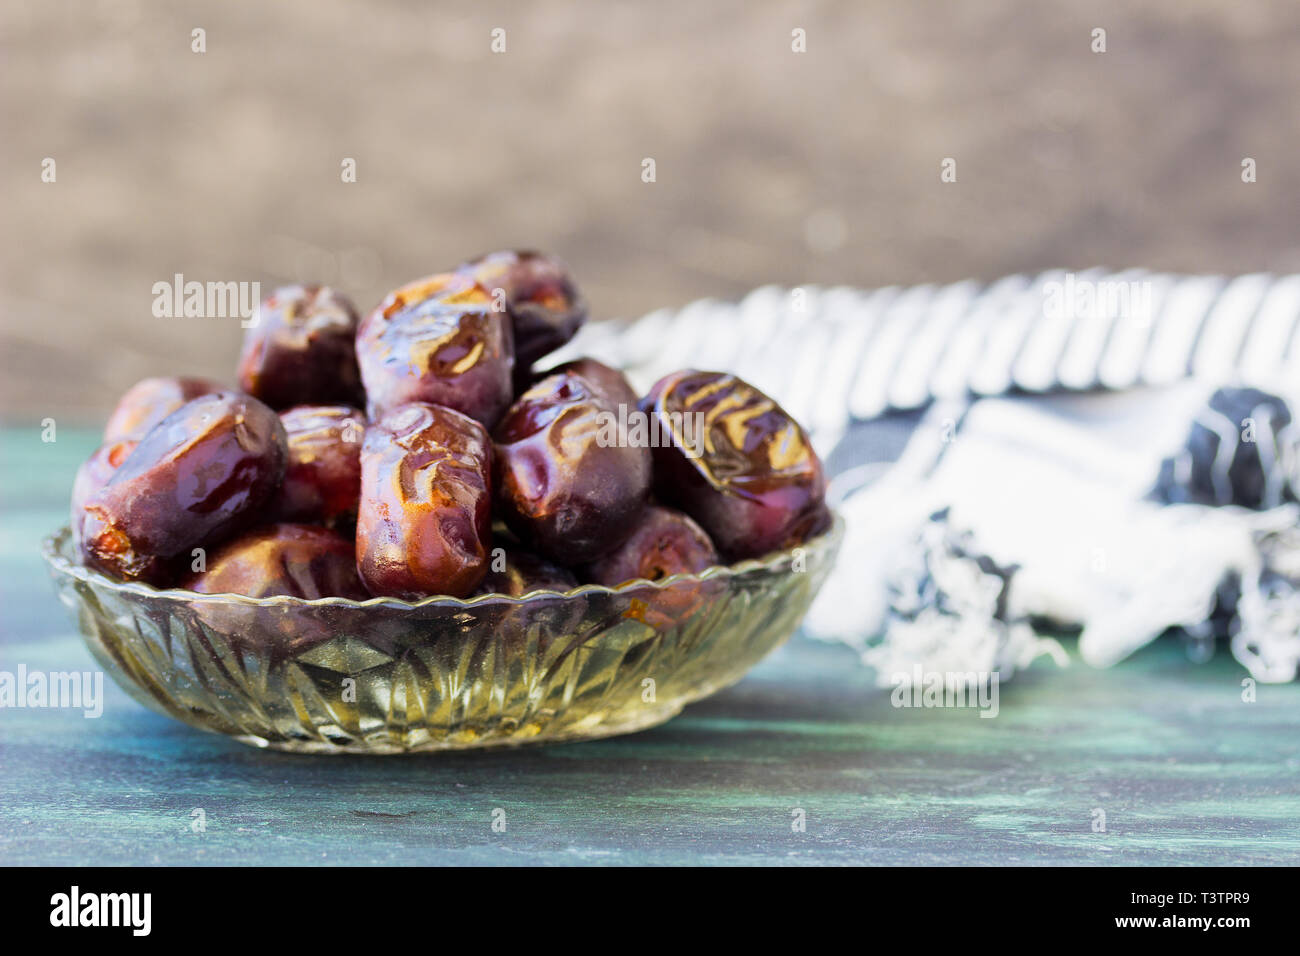 Bowl of dried dates Stock Photo